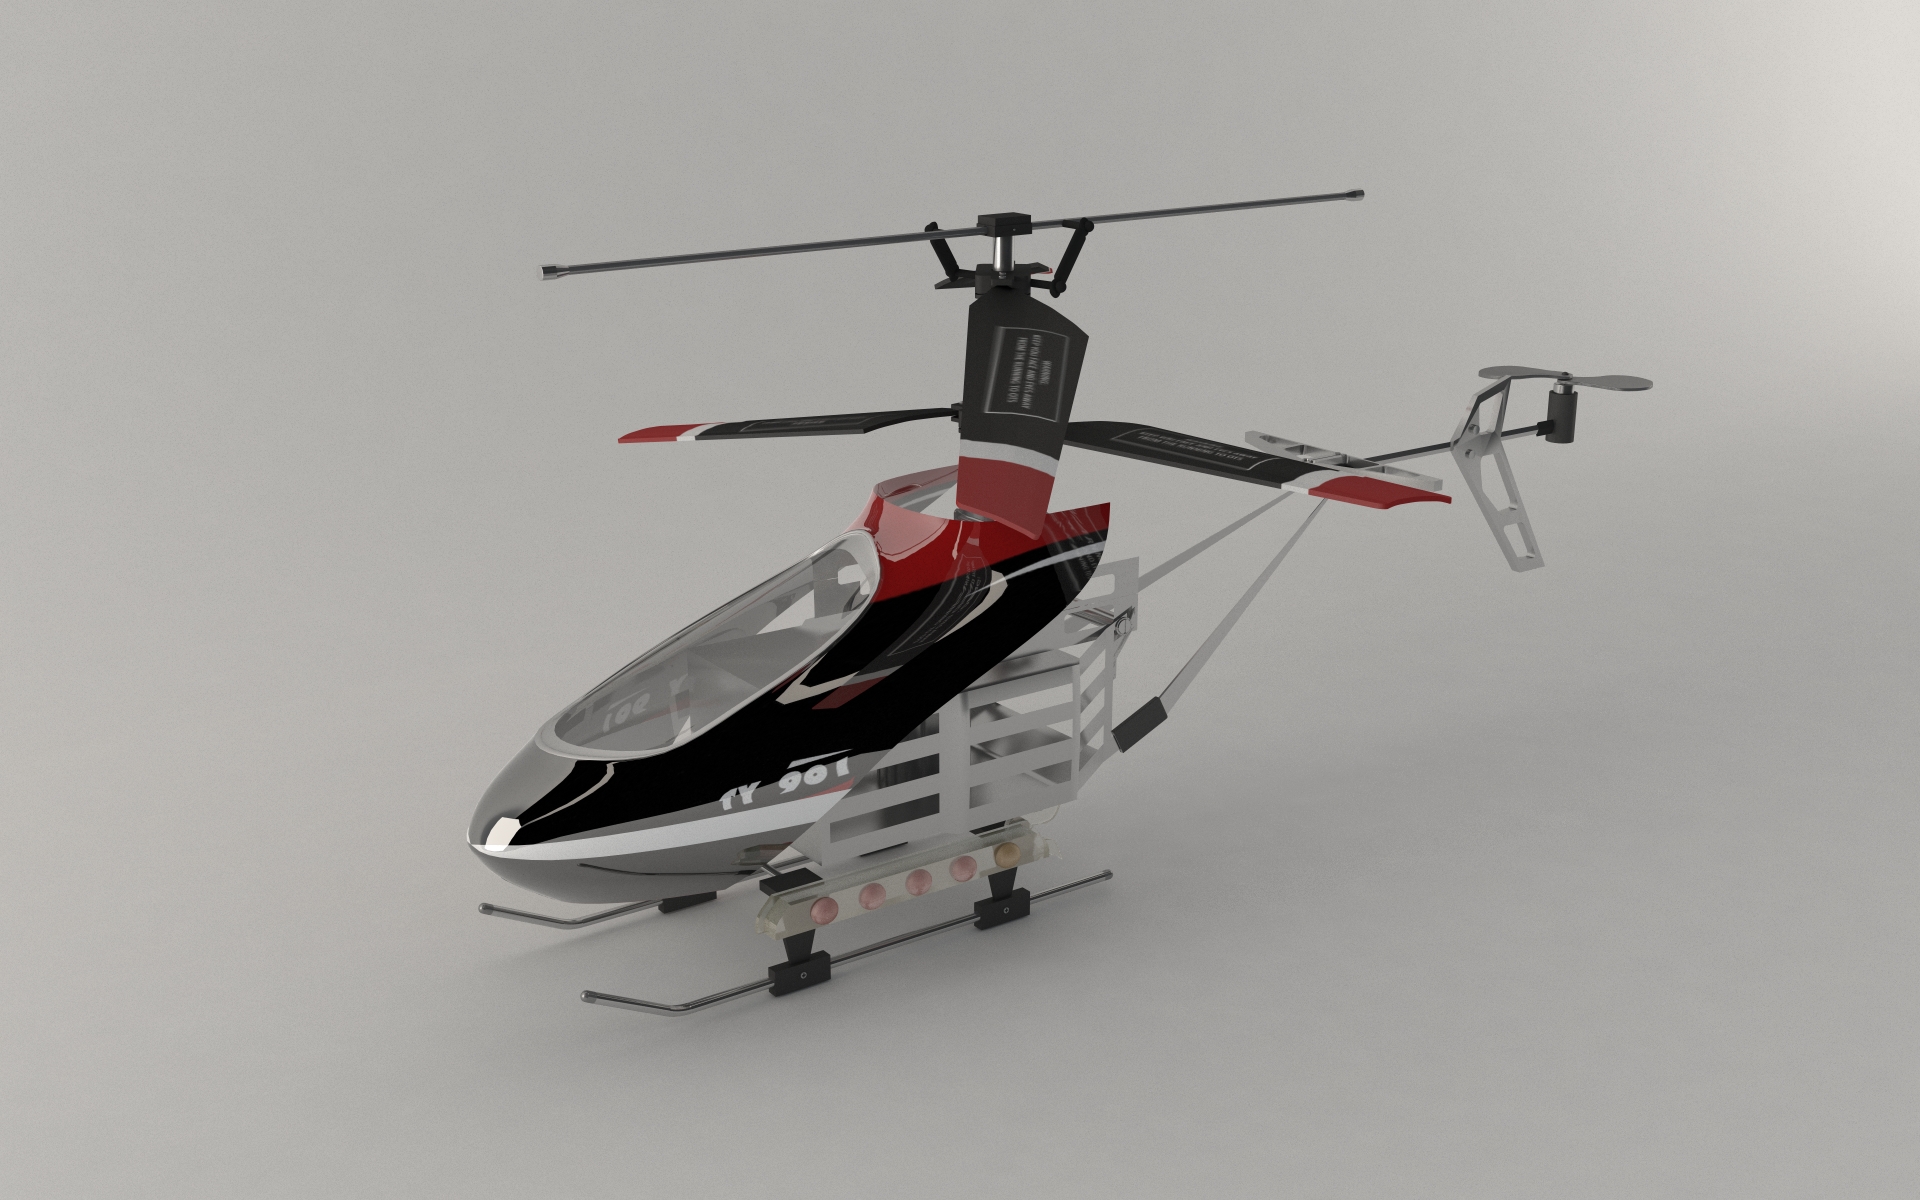 ty901 helicopter